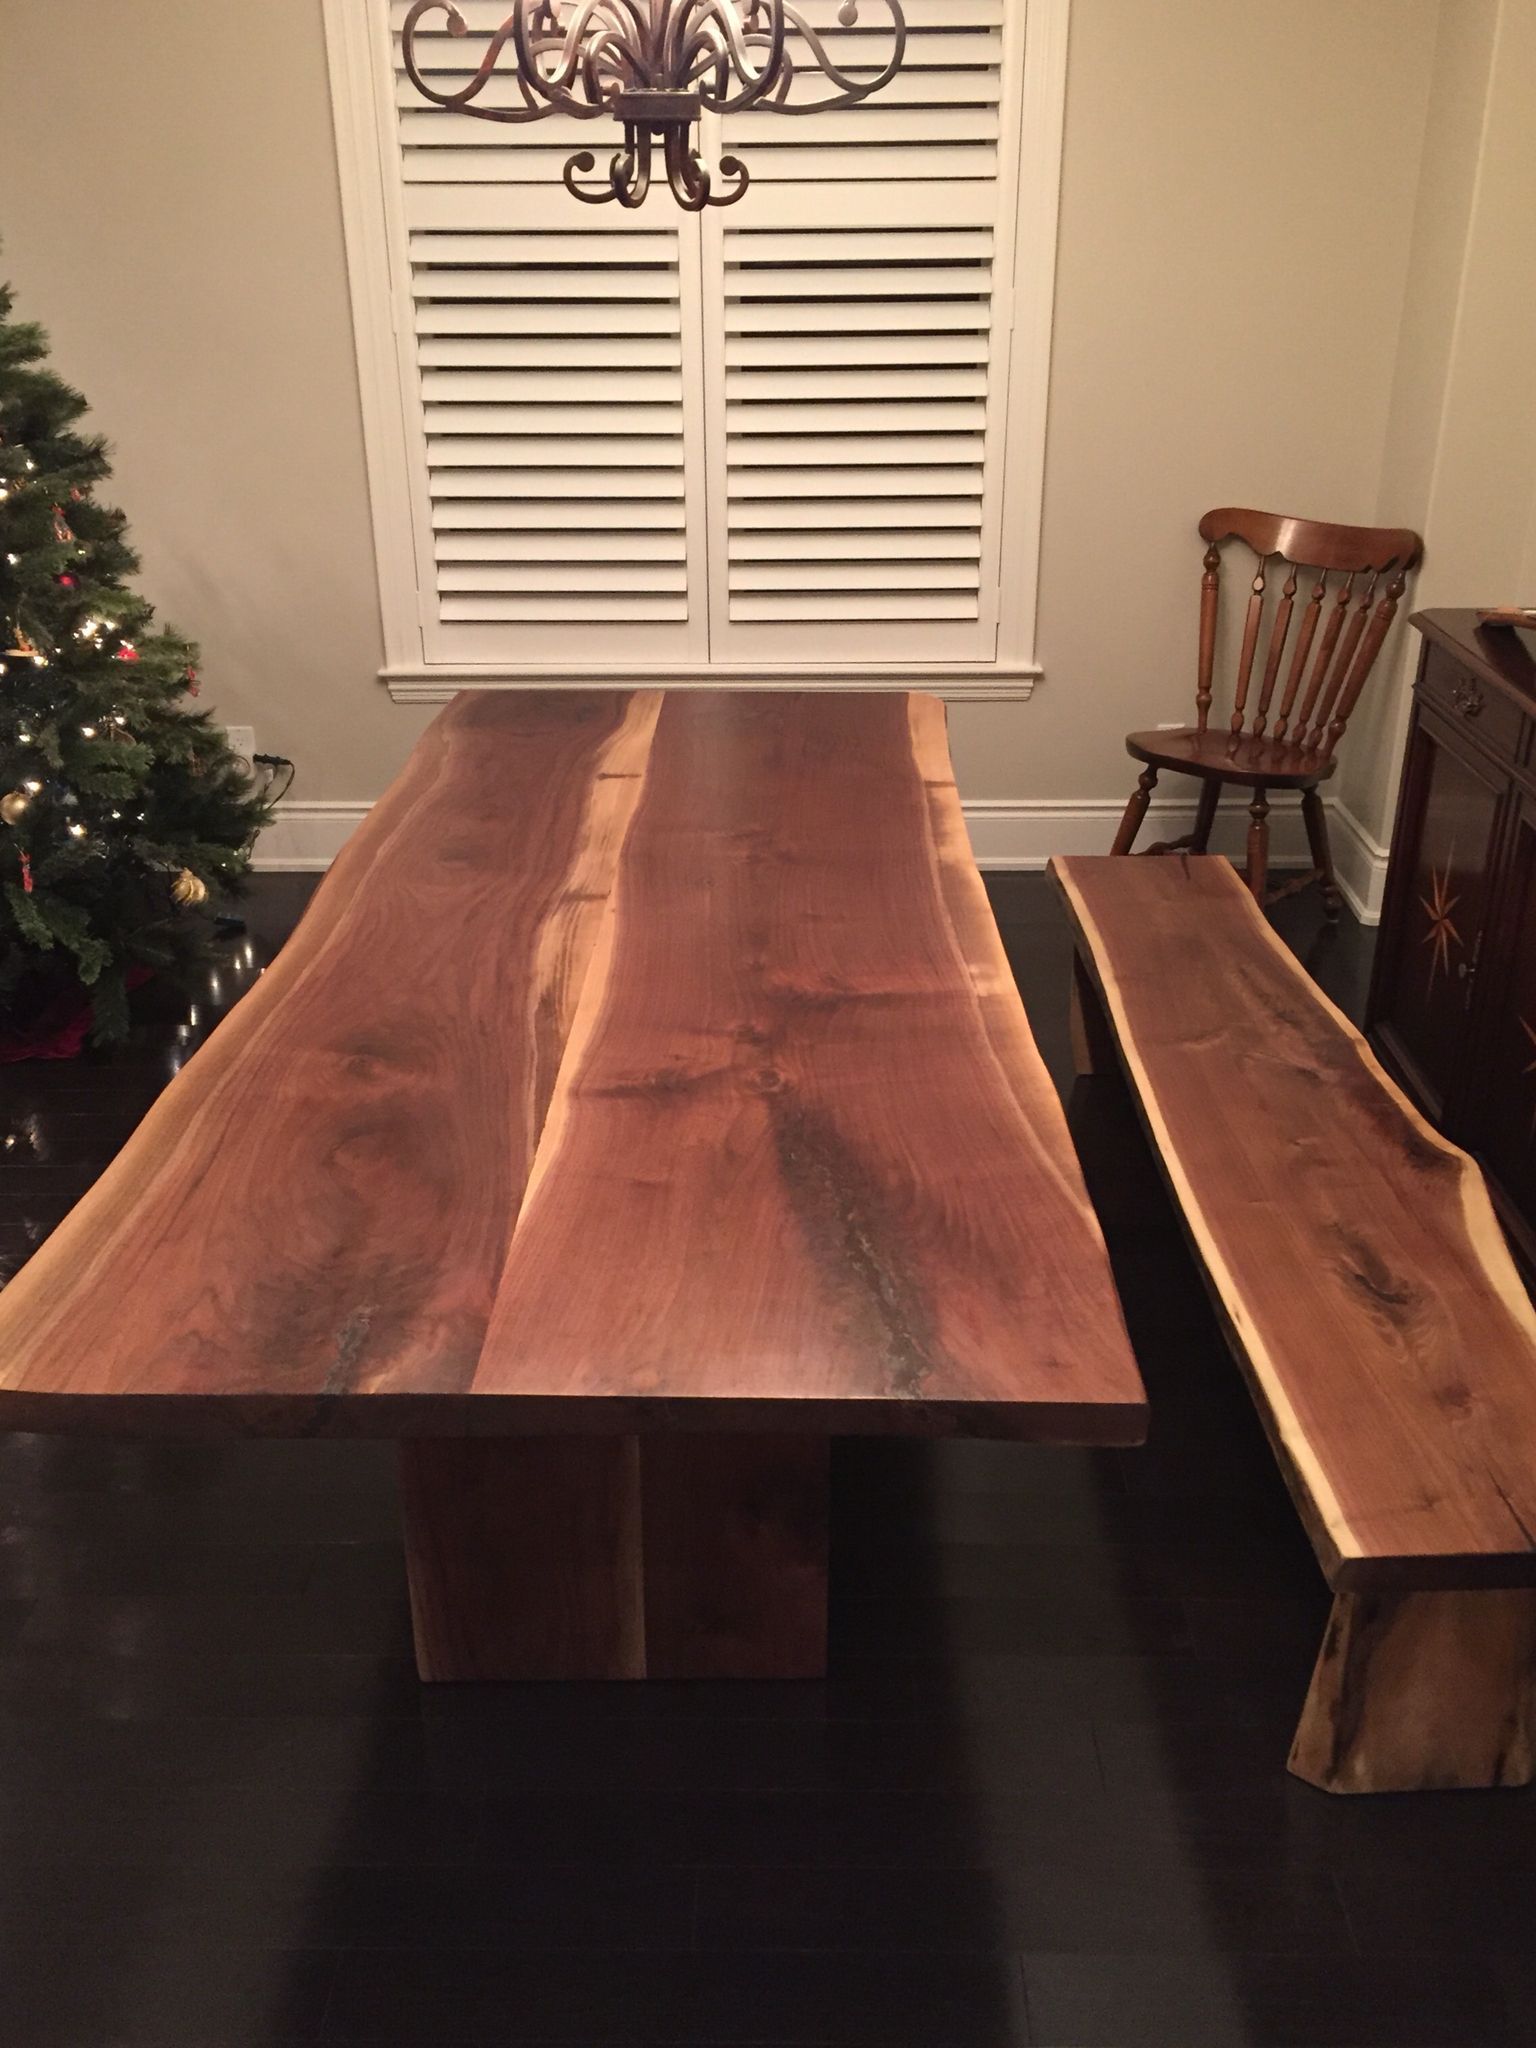 Black Walnut Dining Table With Matching Baench | Live Edge With Regard To Most Up To Date Black And Walnut Dining Tables (View 3 of 15)